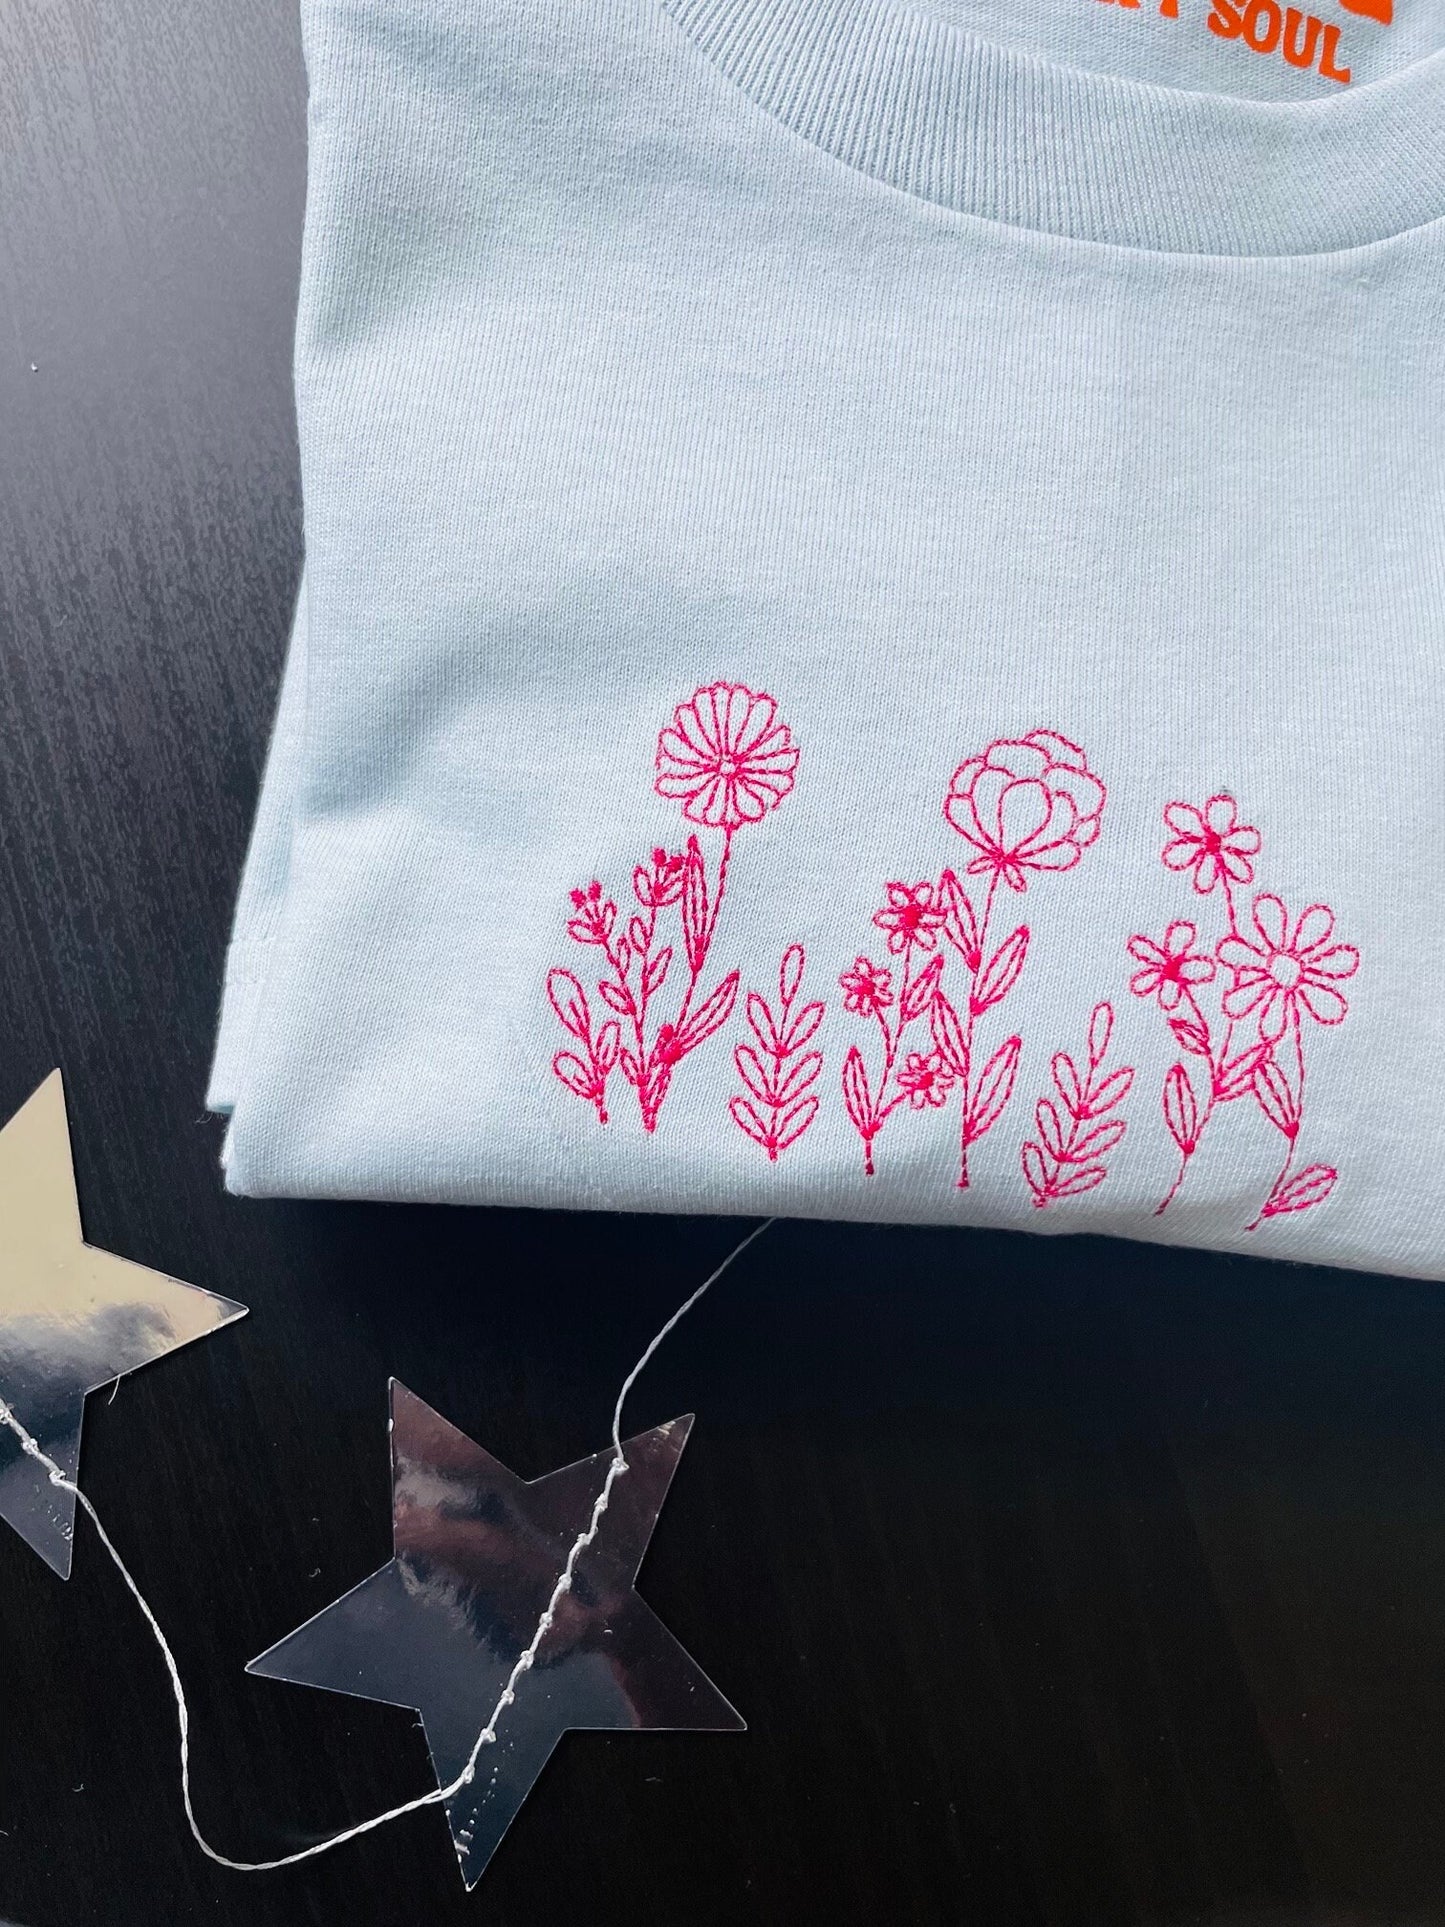 Wildflowers Embroidered Crew Neck T-shirt, Unisex tshirt, Gardening, Floral Embroidery, Botanical Gift, Flower Aesthetic, Plant Lady Shirt